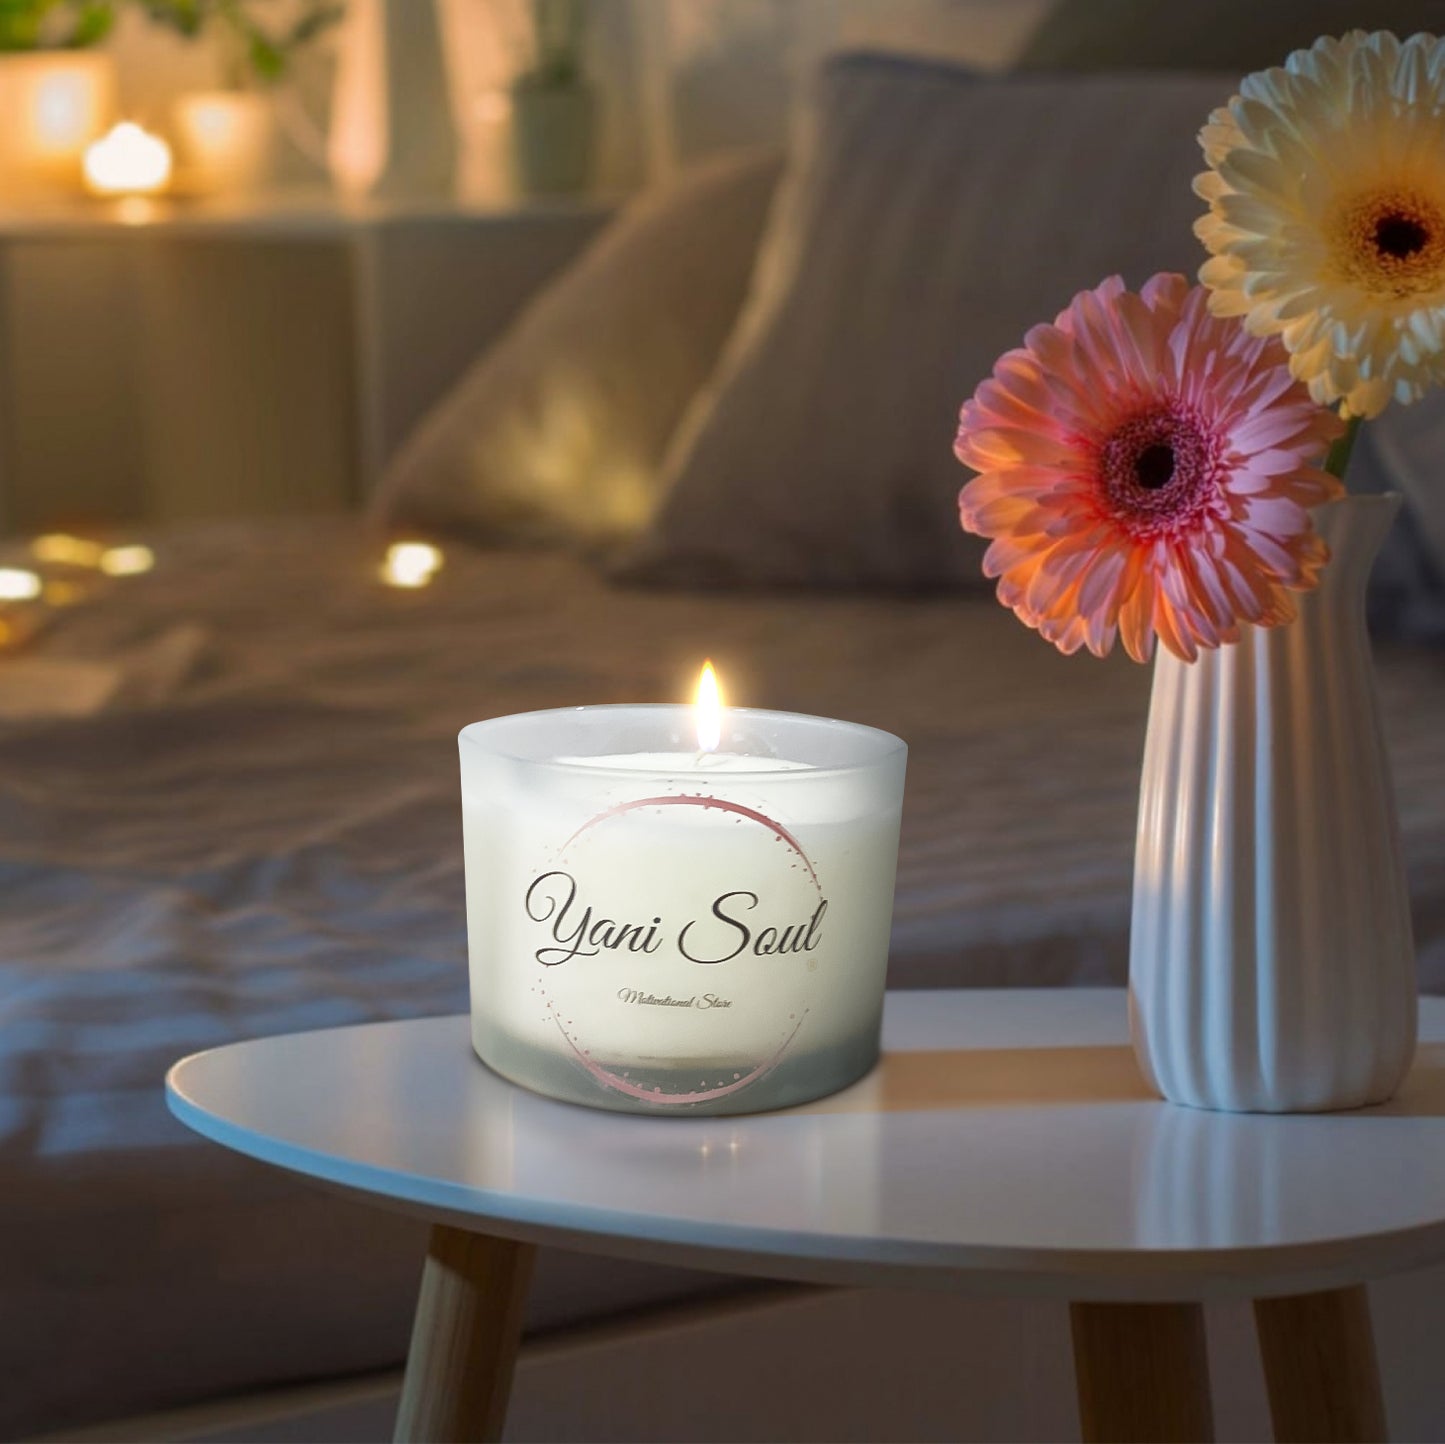 The Sensual Moon Soy Wax Luxury Candles  Scent to Lift Your Spirit & Transform the Room